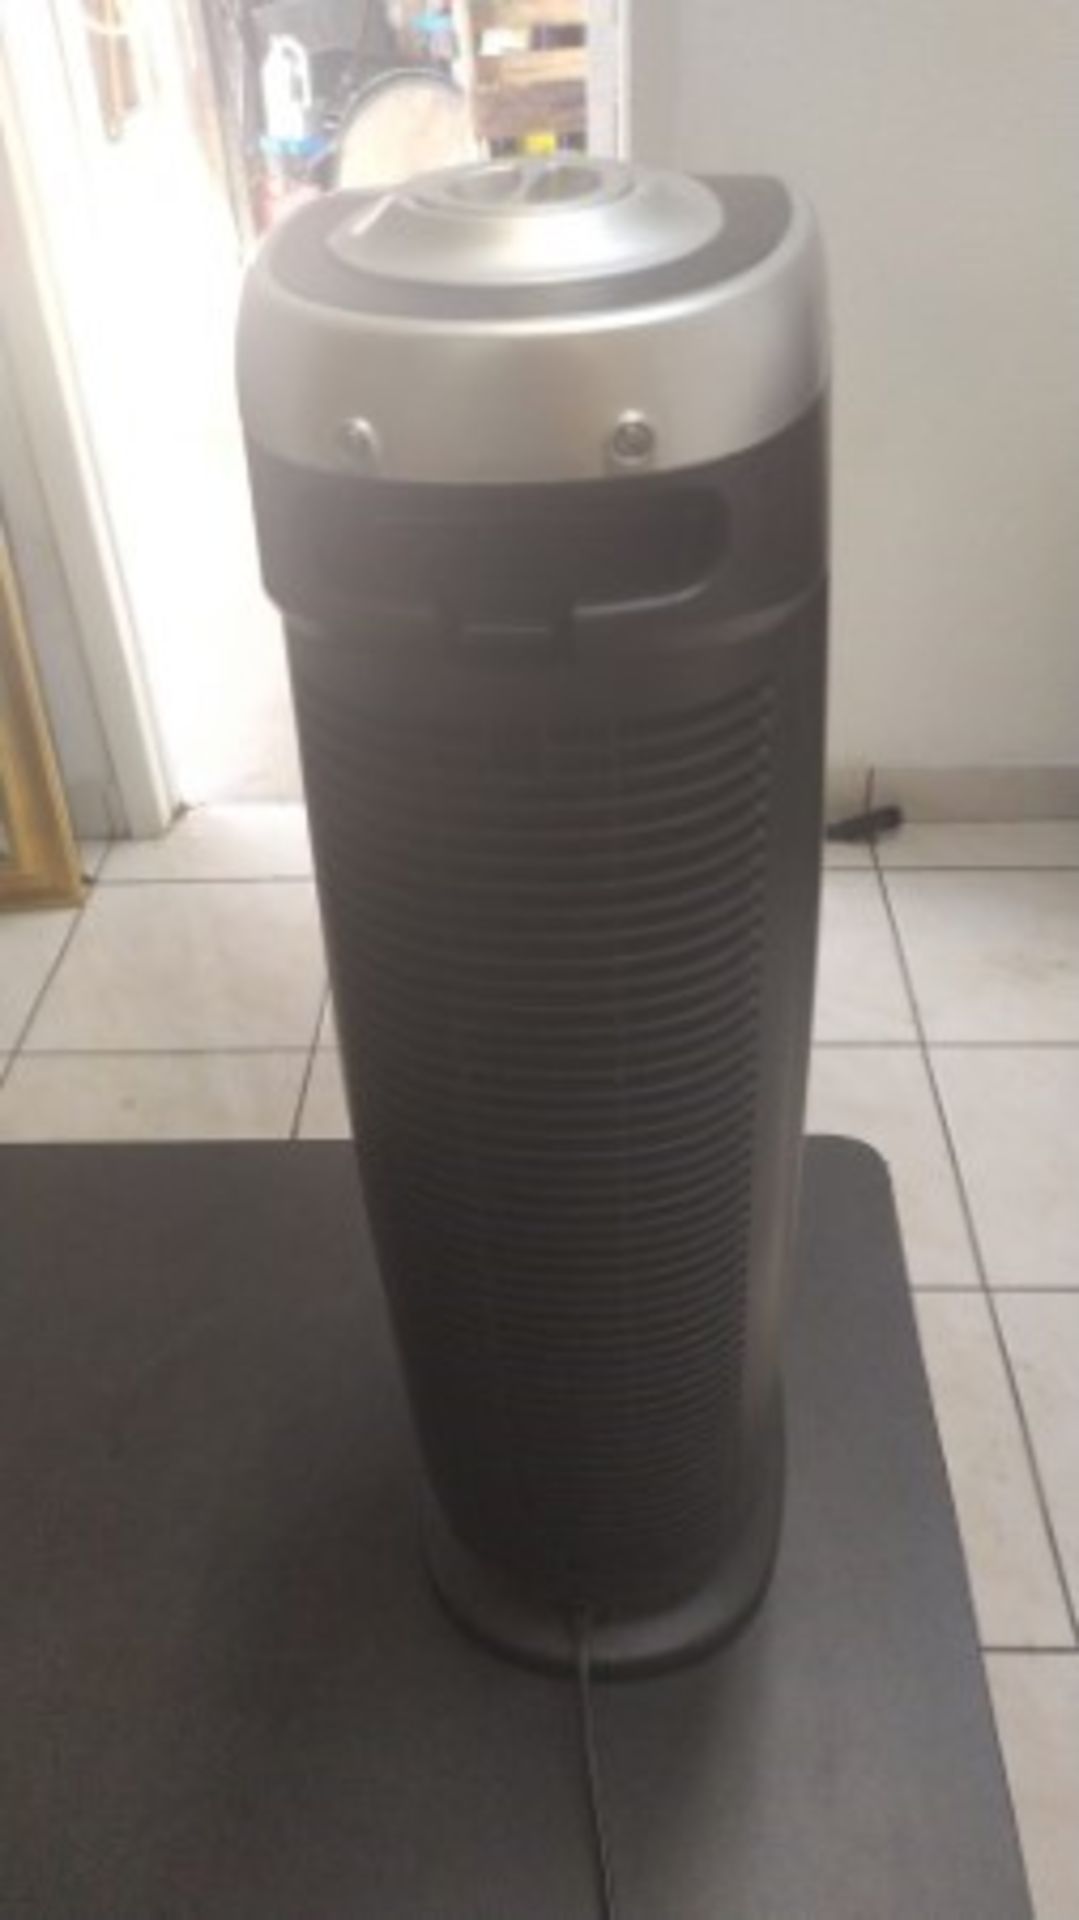 TRUE HEPA 4-IN-1 AIR PURIFIER WITH UV SANITIZER & ODOR REDUCTION - 22'' TOWER - Image 3 of 3